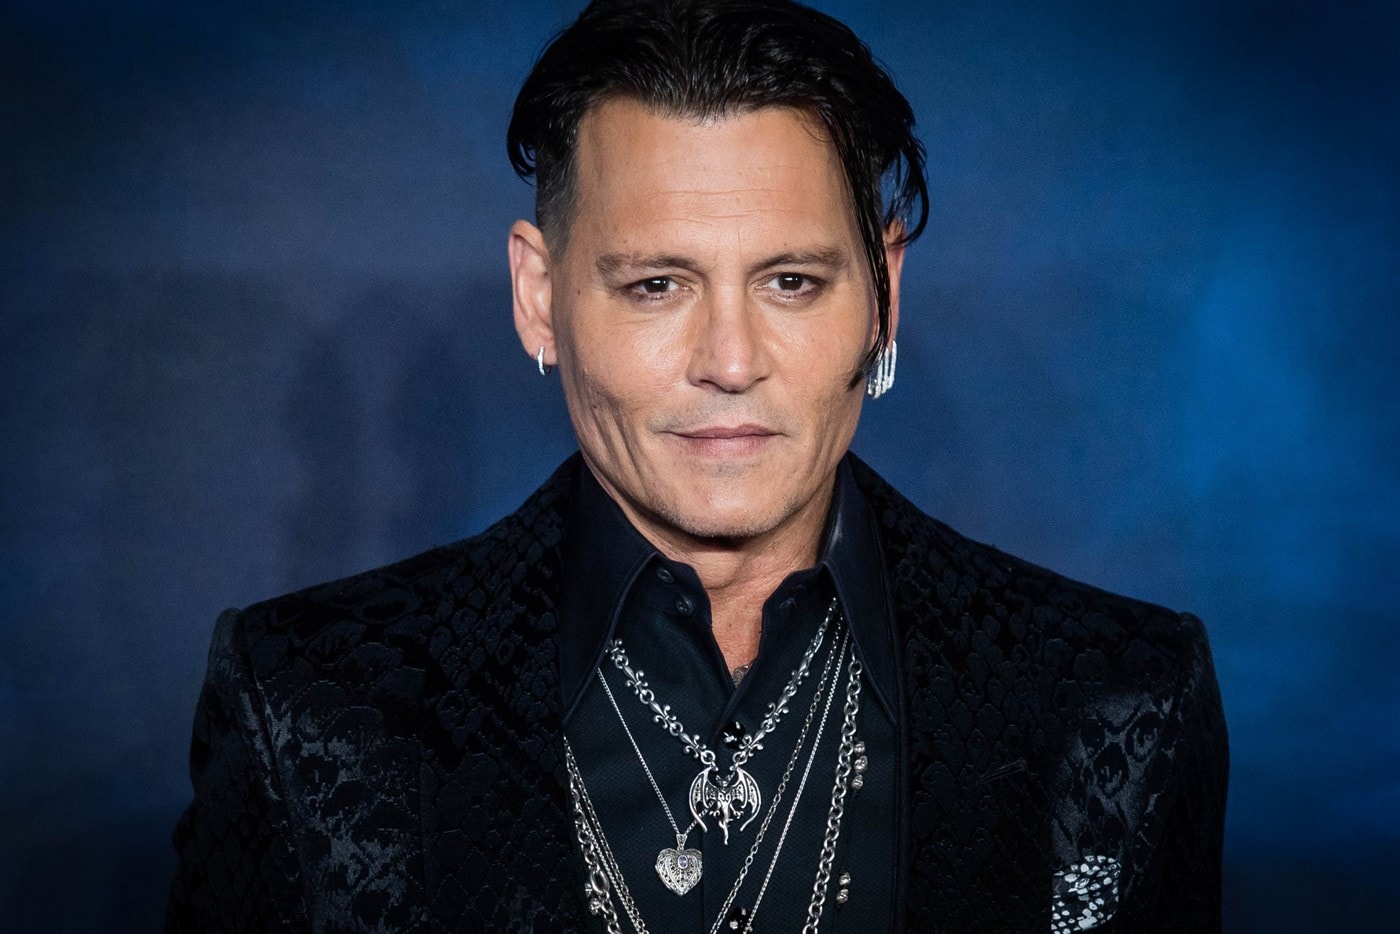 Johnny Depp Resigns From 'Fantastic Beasts' Franchise The Sun Legal Claim Amber Heard Wife-Beater Case Warner Bros. Request